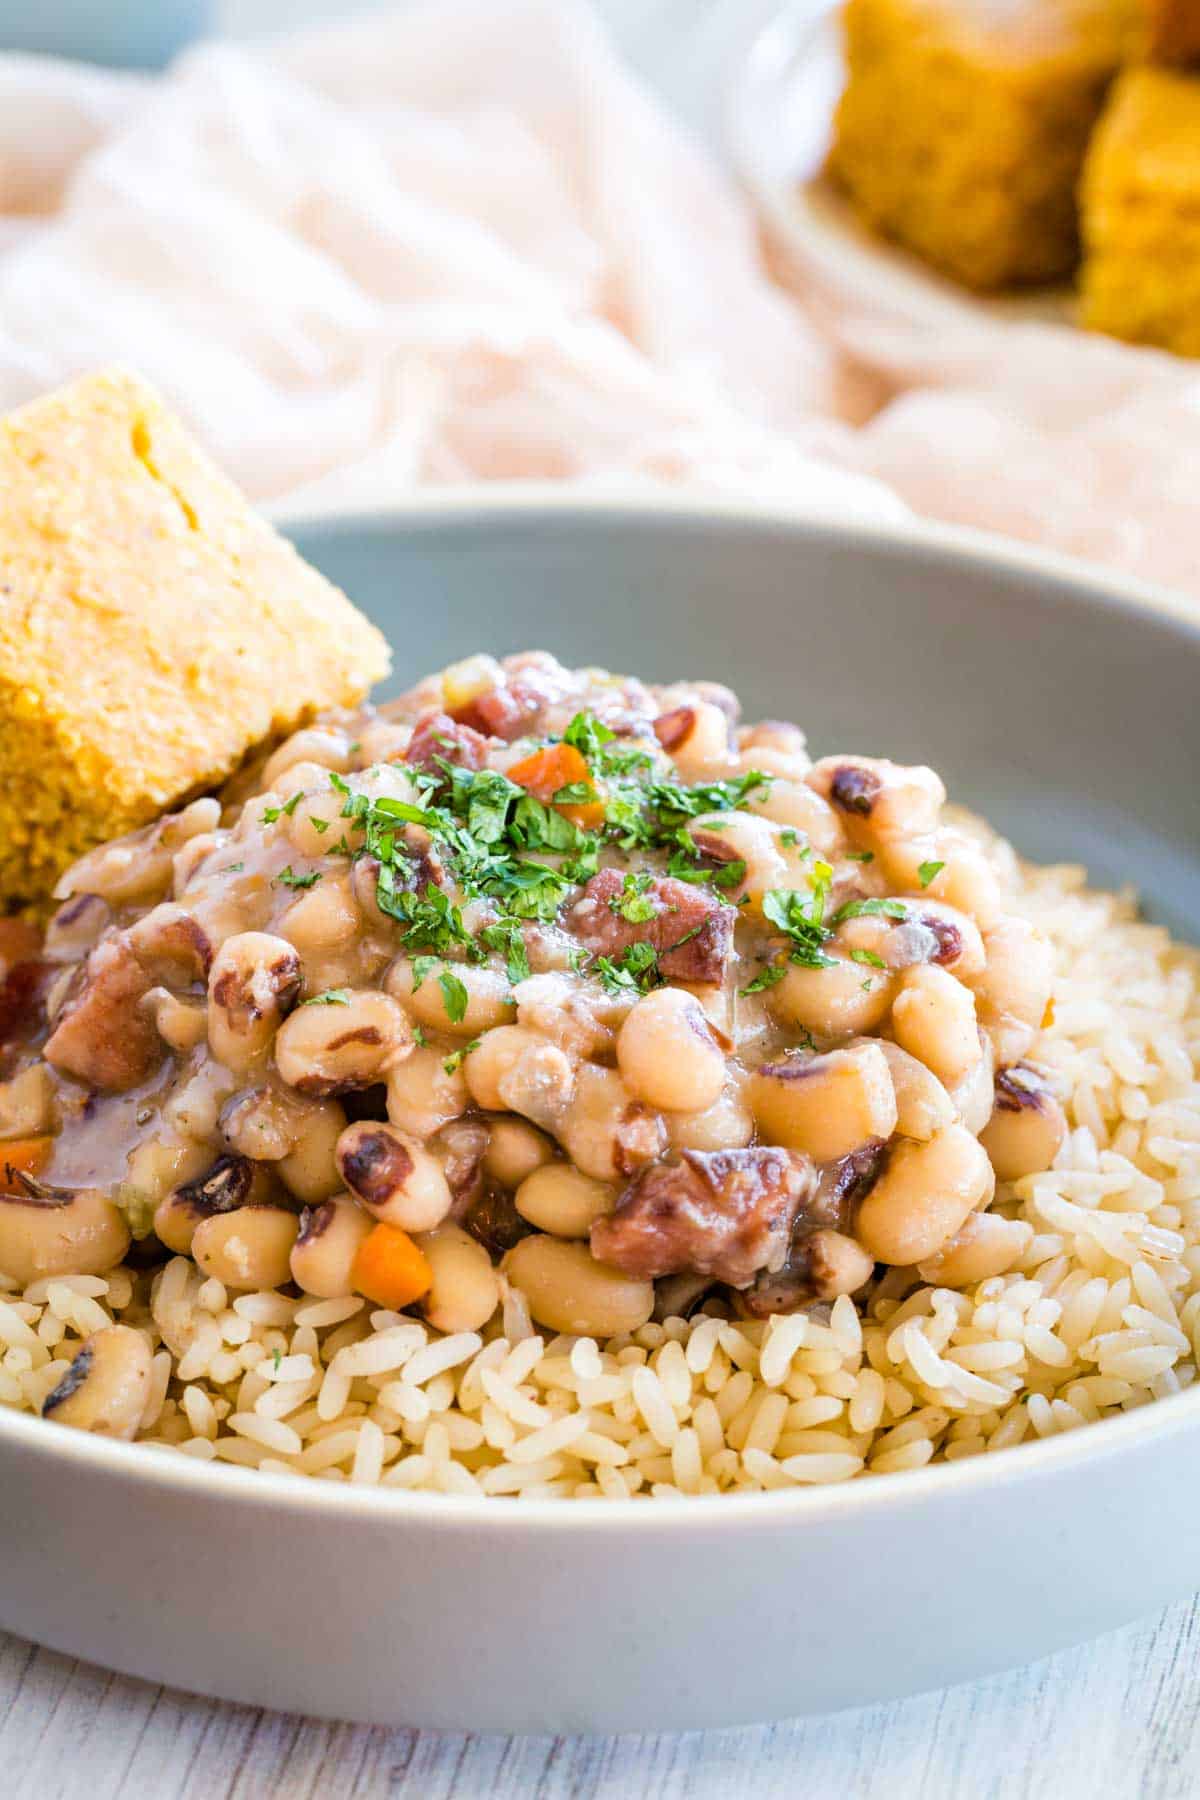 Black eyed peas served over rice, with a side of cornbread.